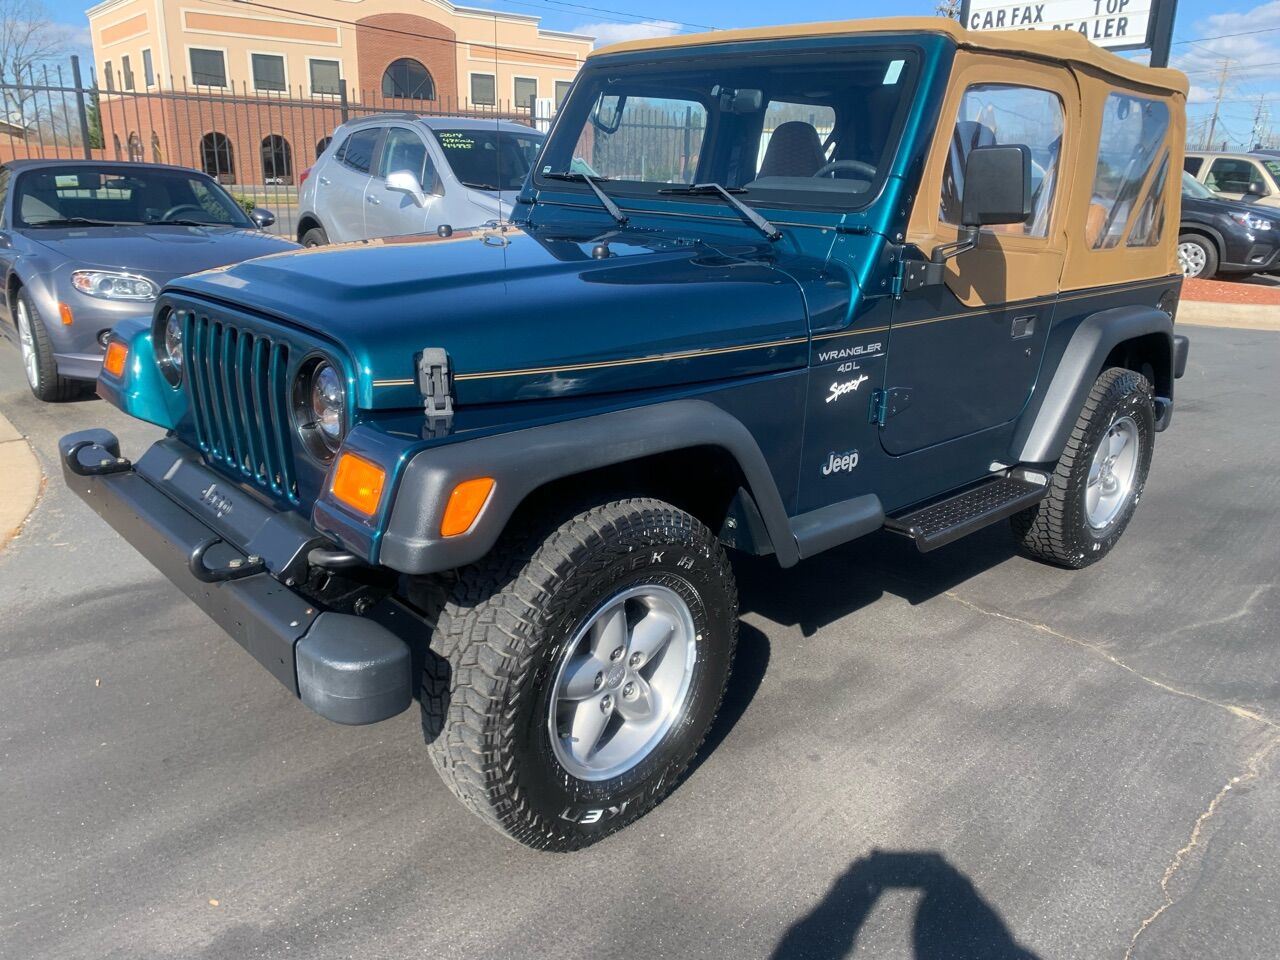 1998 Jeep Wrangler For Sale In West Palm Beach, FL ®